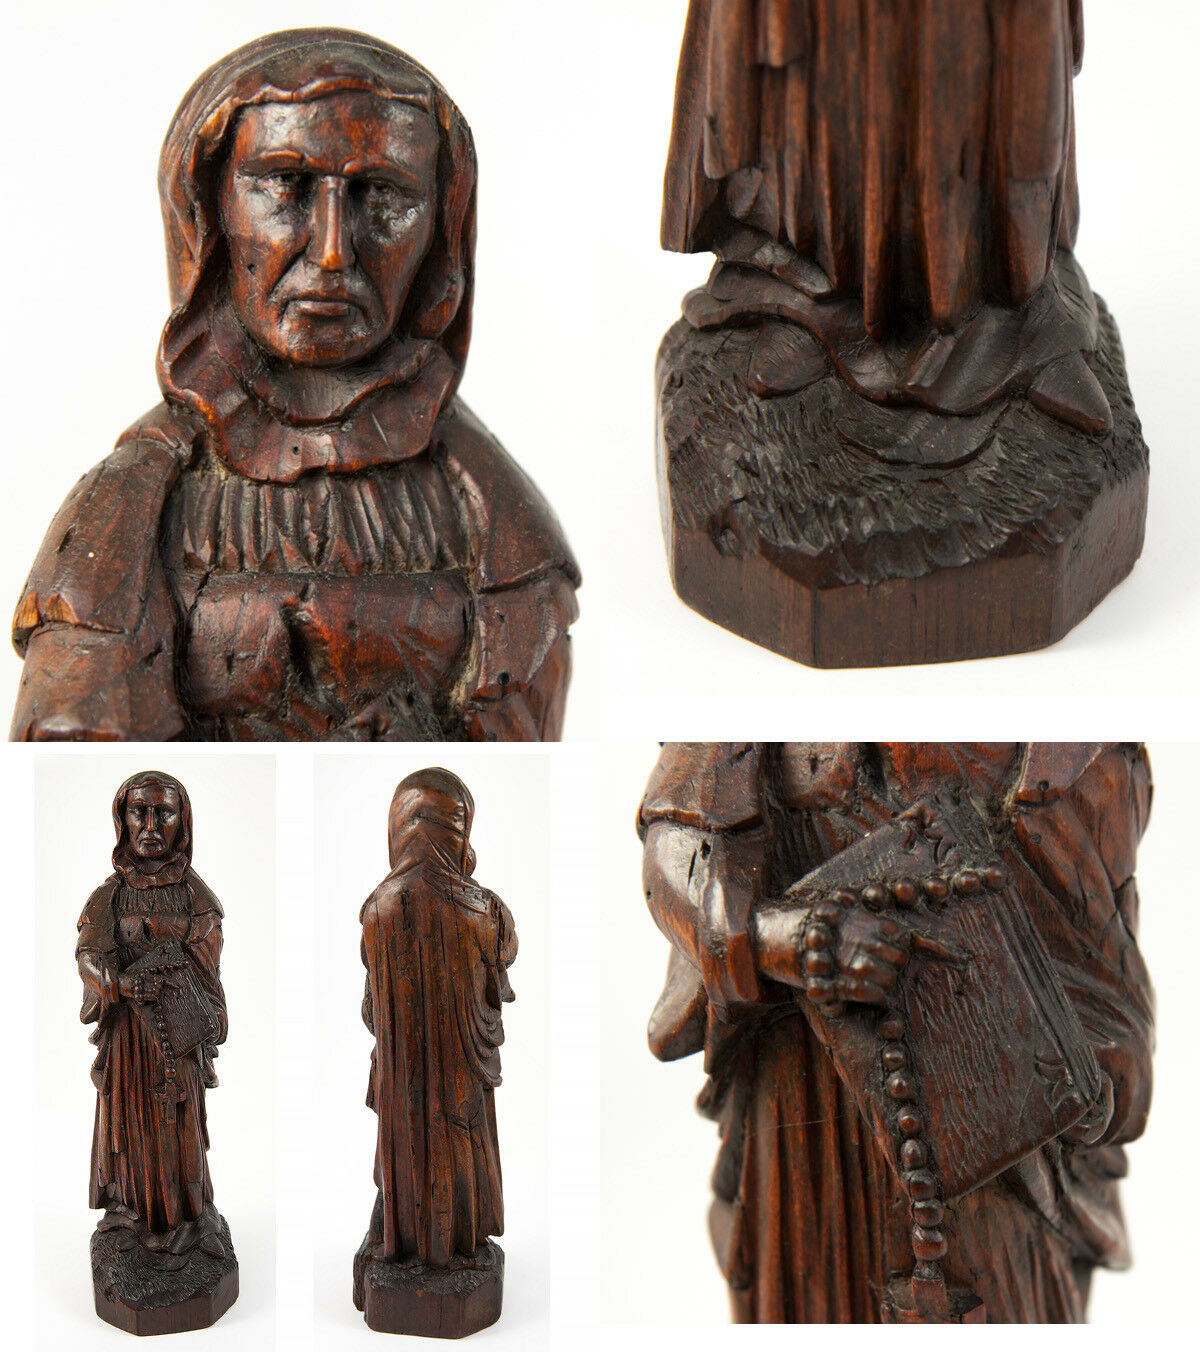 Antique Carved Wood Saint Figure from 16th-18th c. Altarpiece, Northern European